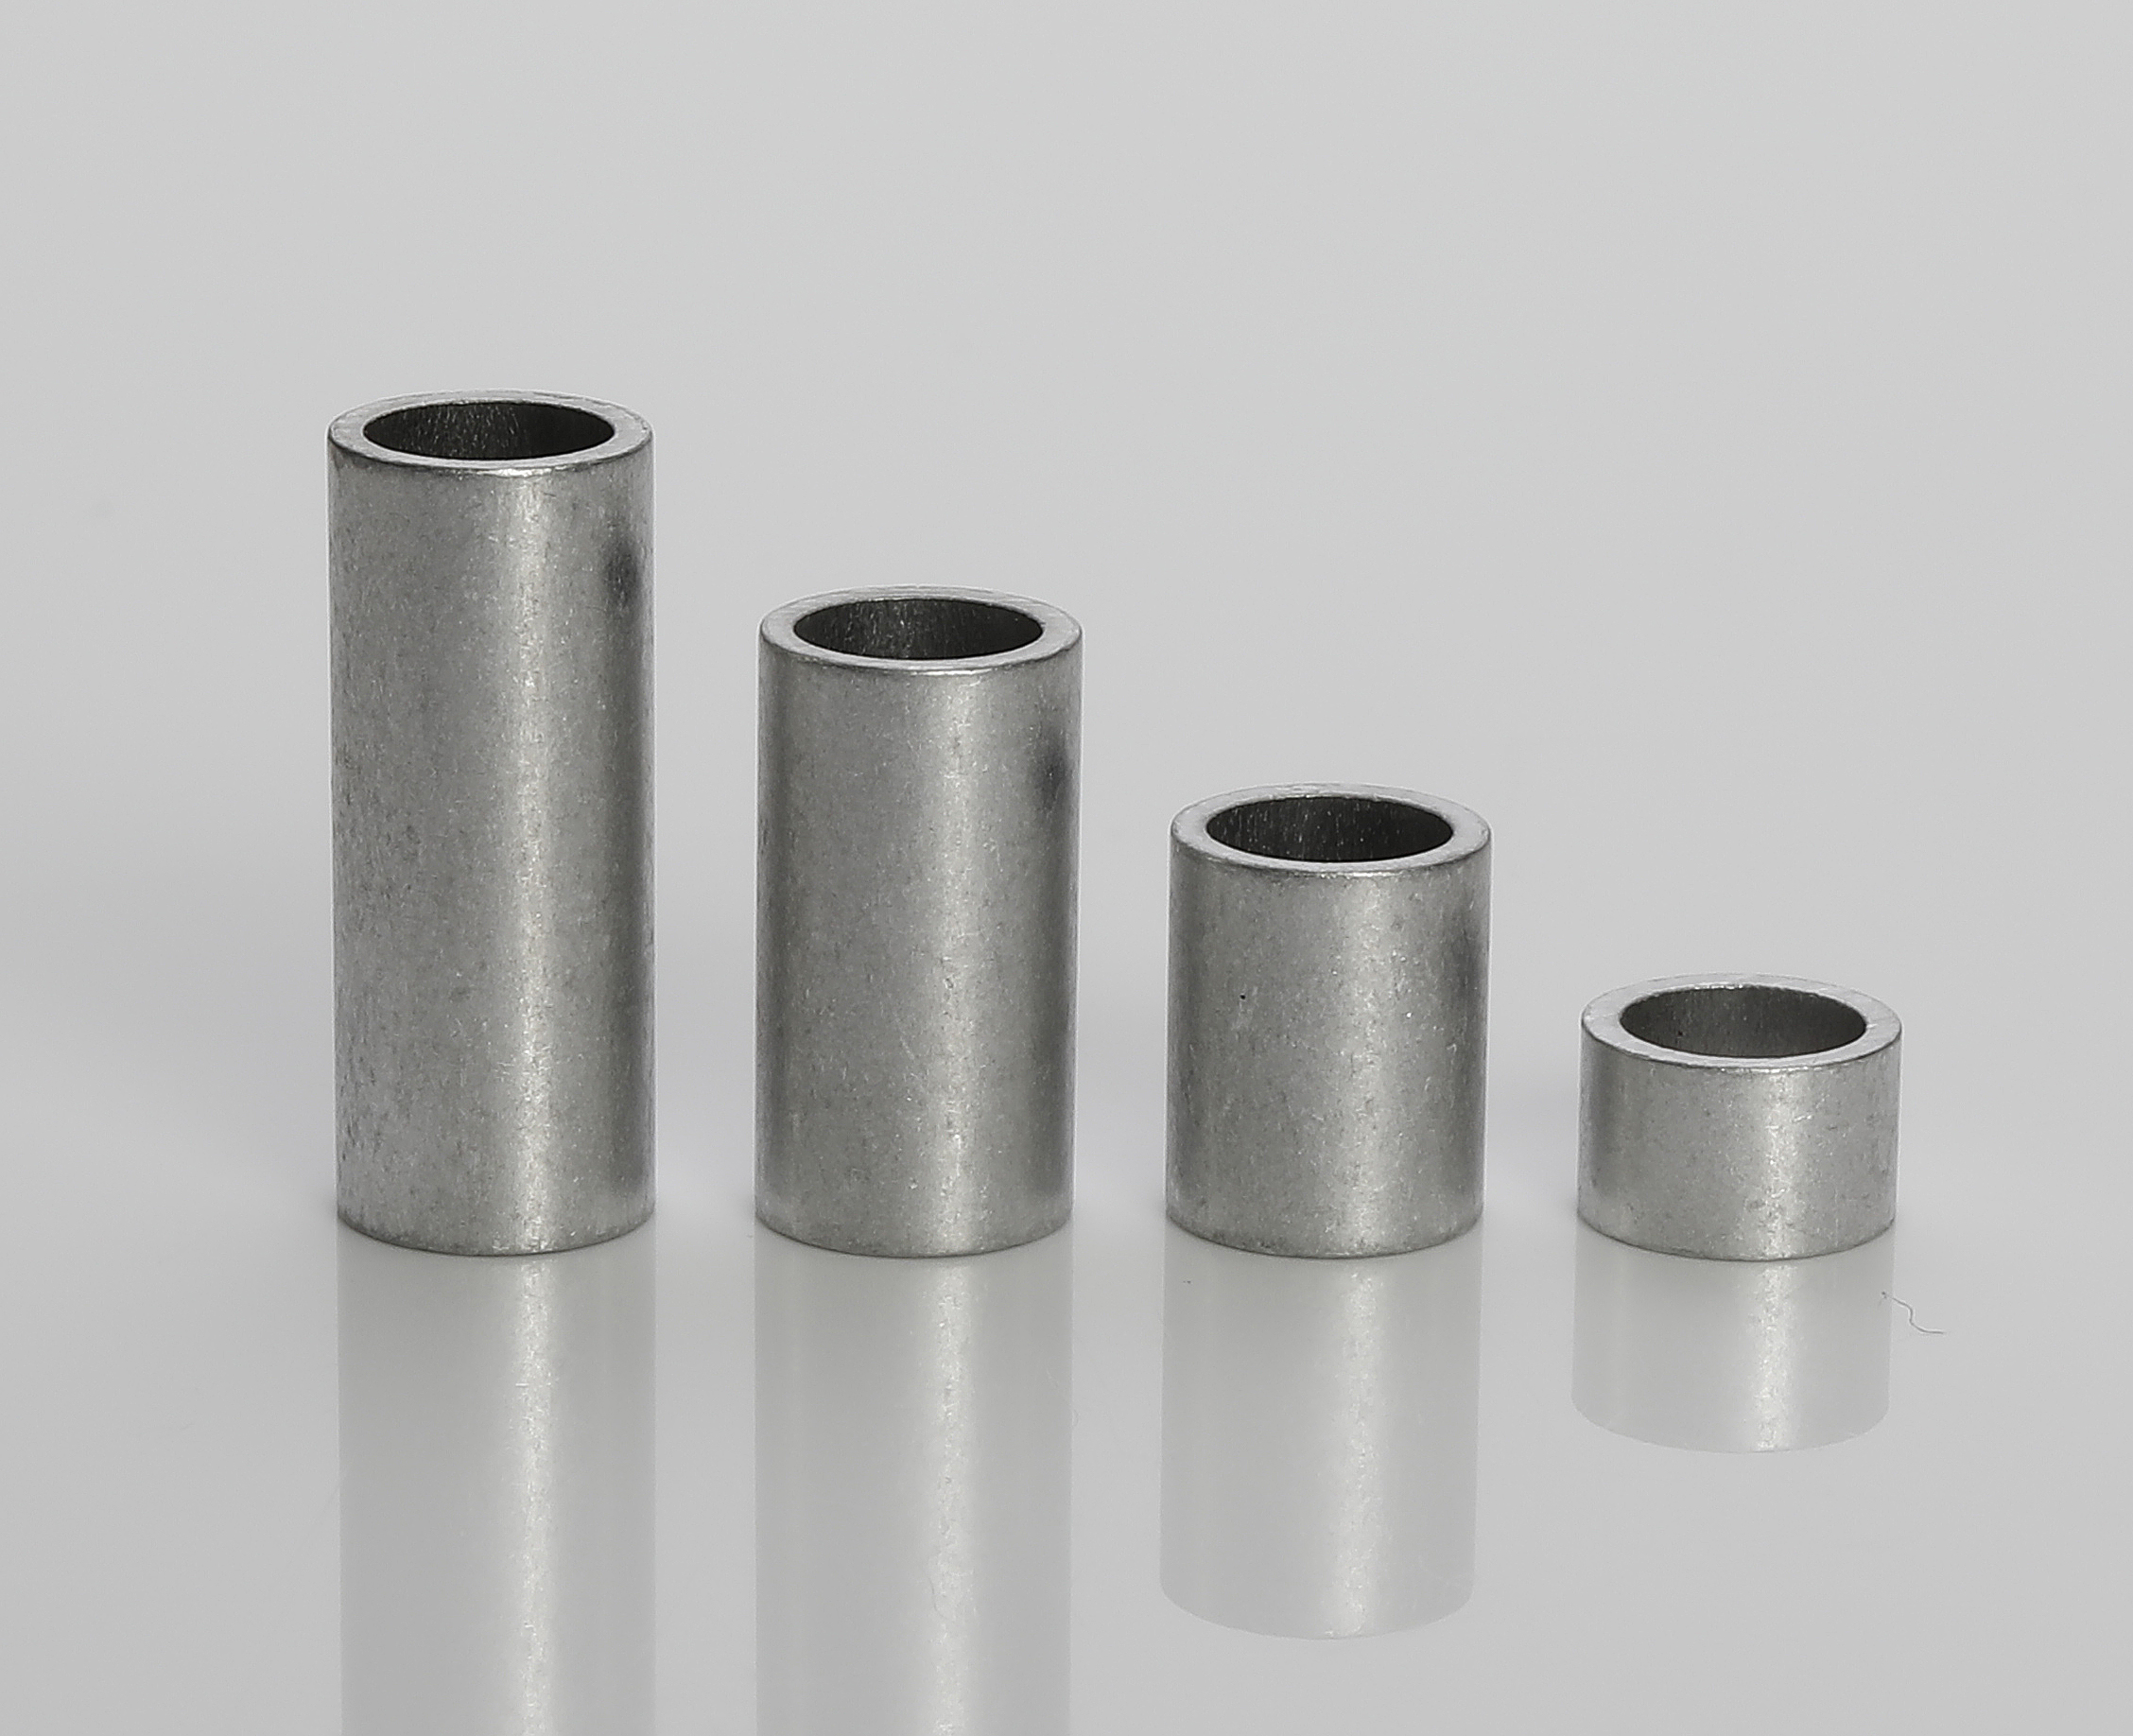 Aluminum sleeves 8x6x1 mm (up to M6)